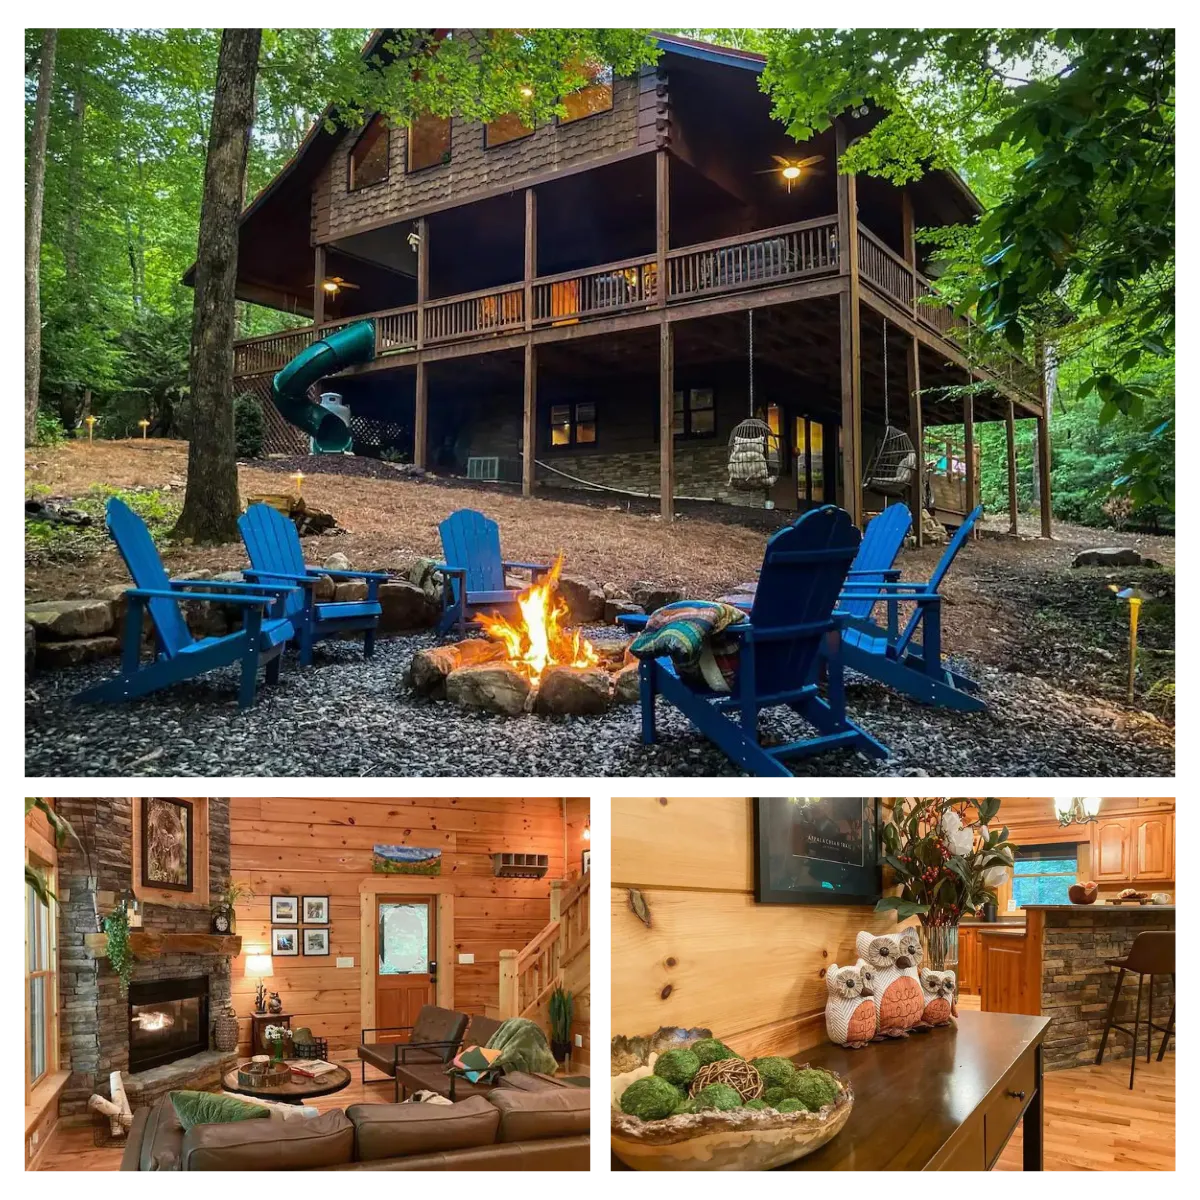 Visit Blissful Retreat in Morganton, surrounded by the beautiful Blue Ridge Mountains. Enjoy lush green forests in summer and colorful leaves in fall, with peaceful nights filled with nature's melody and twinkling fireflies.